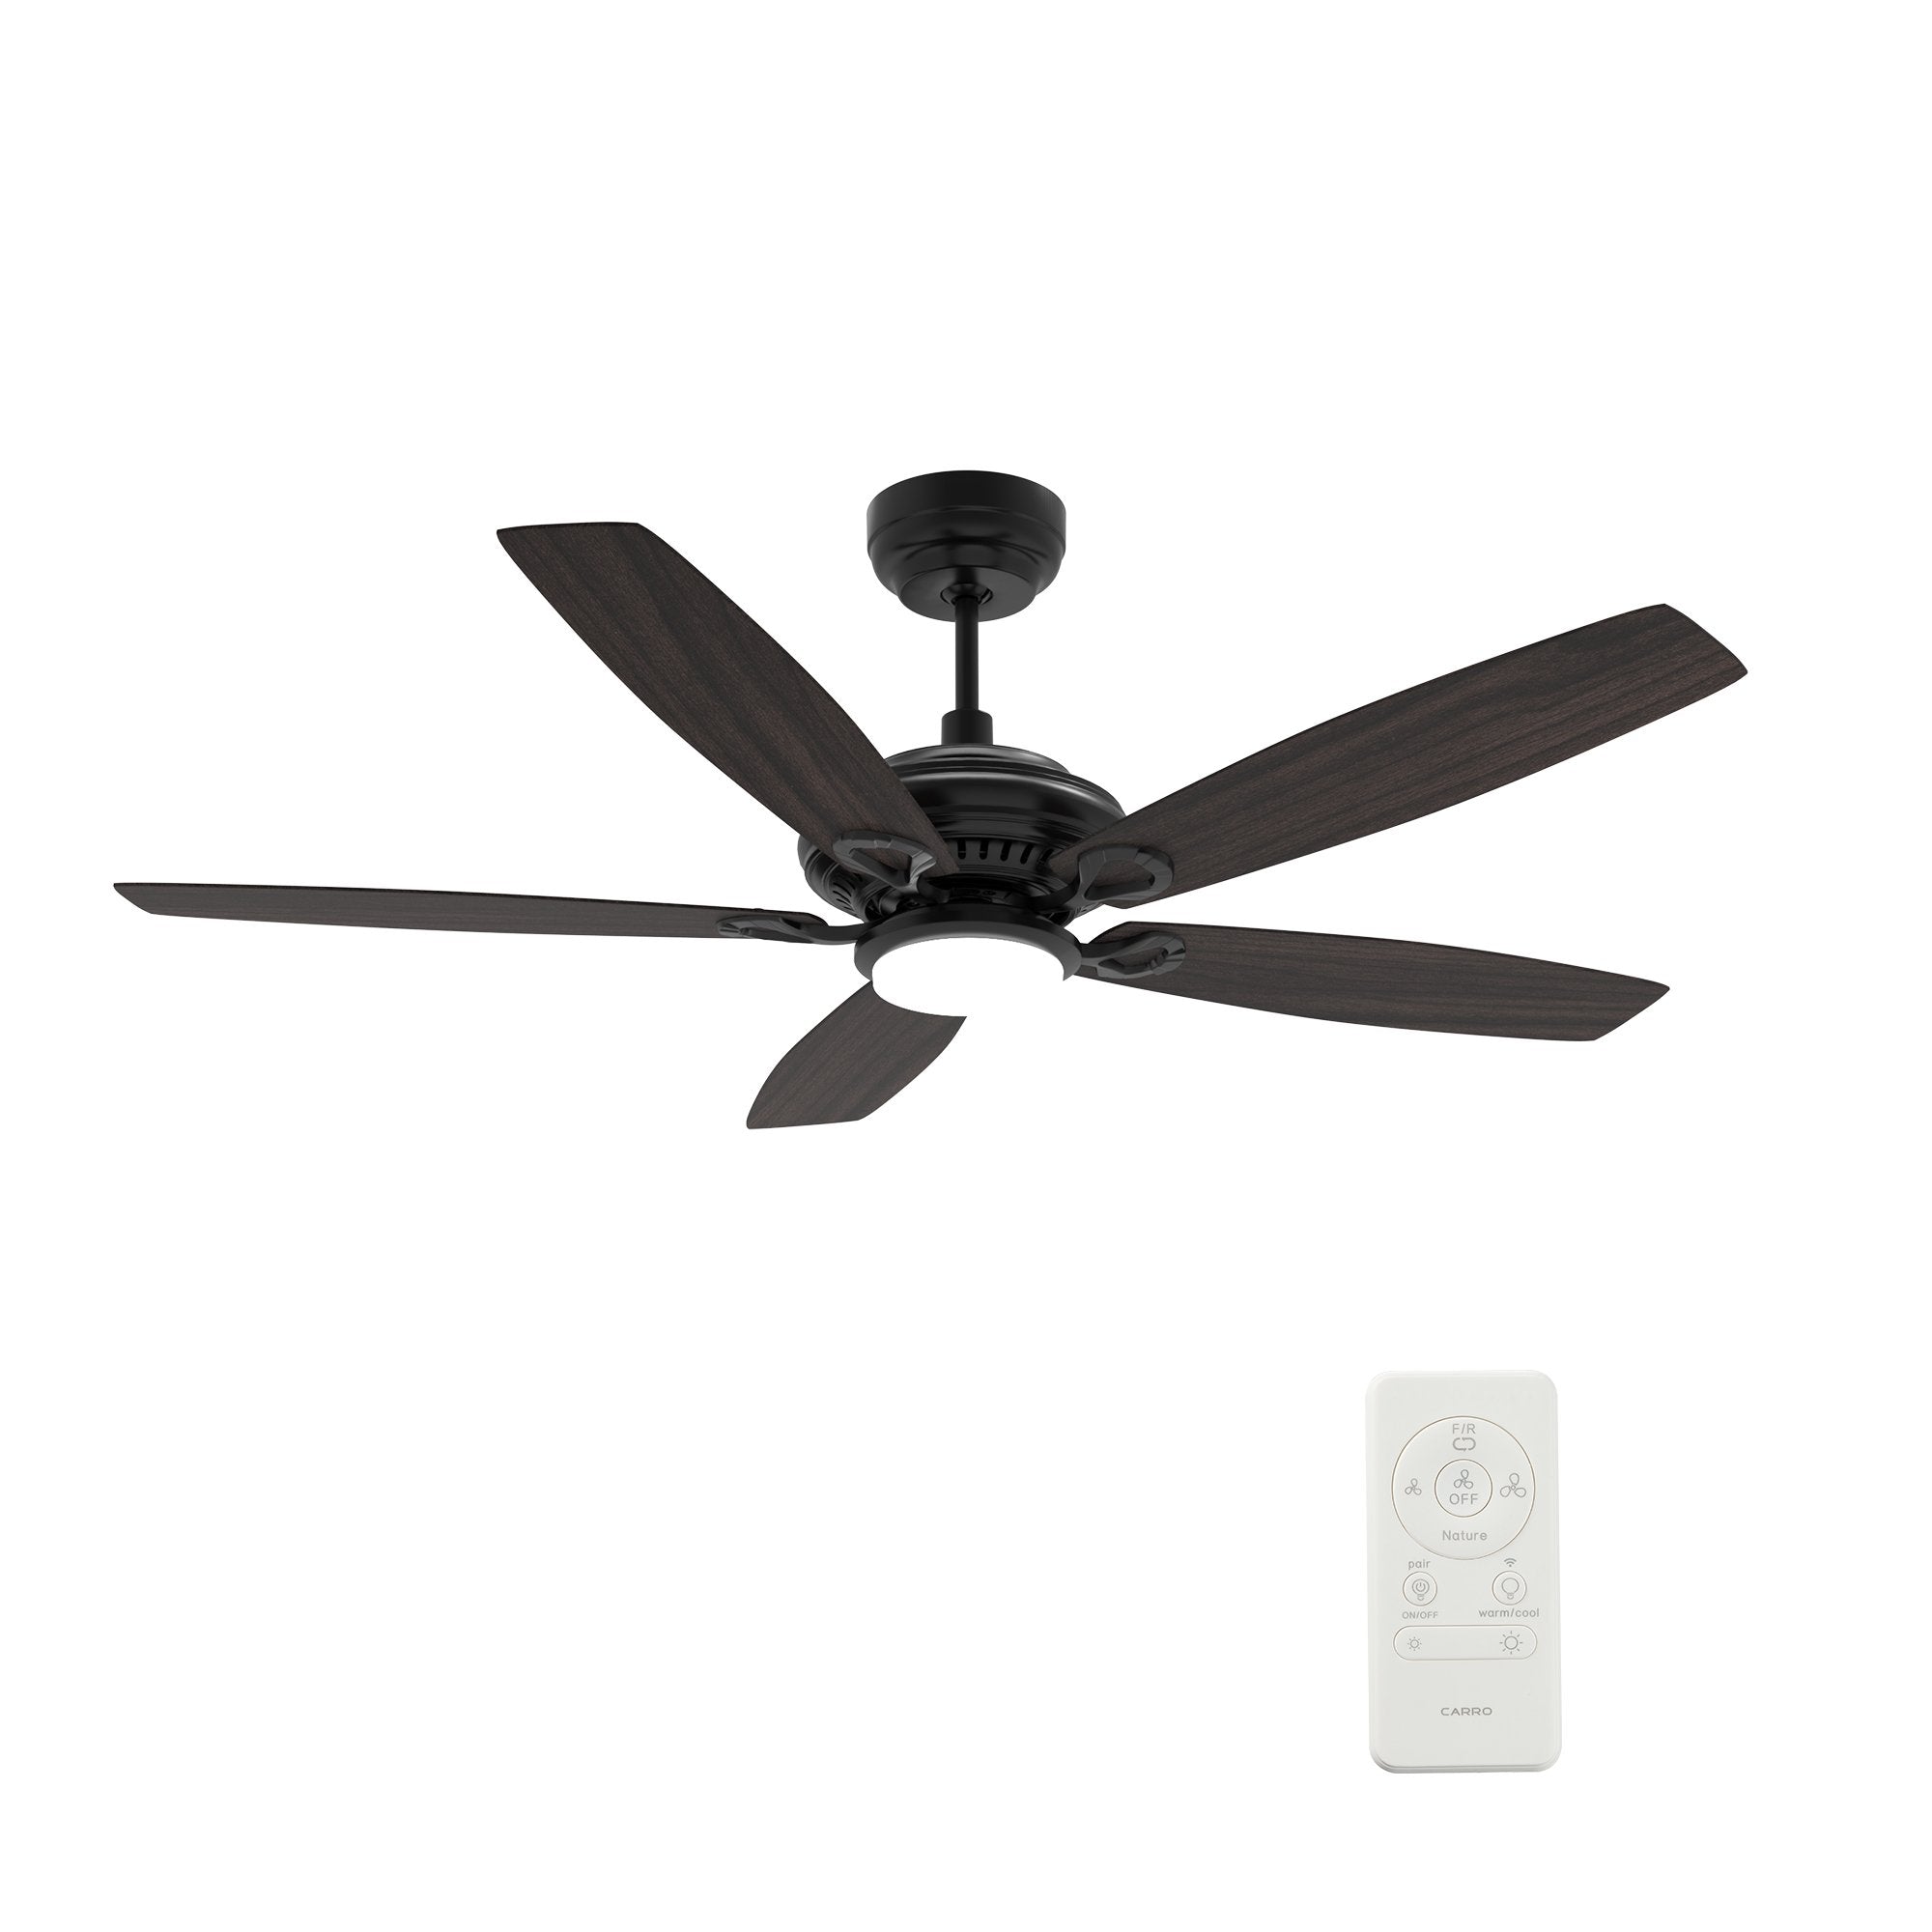 Somerset 52' Best Smart Ceiling Fan with Remote, Light Kit Included, Works with Google Assistant and Amazon Alexa,Siri Shortcut